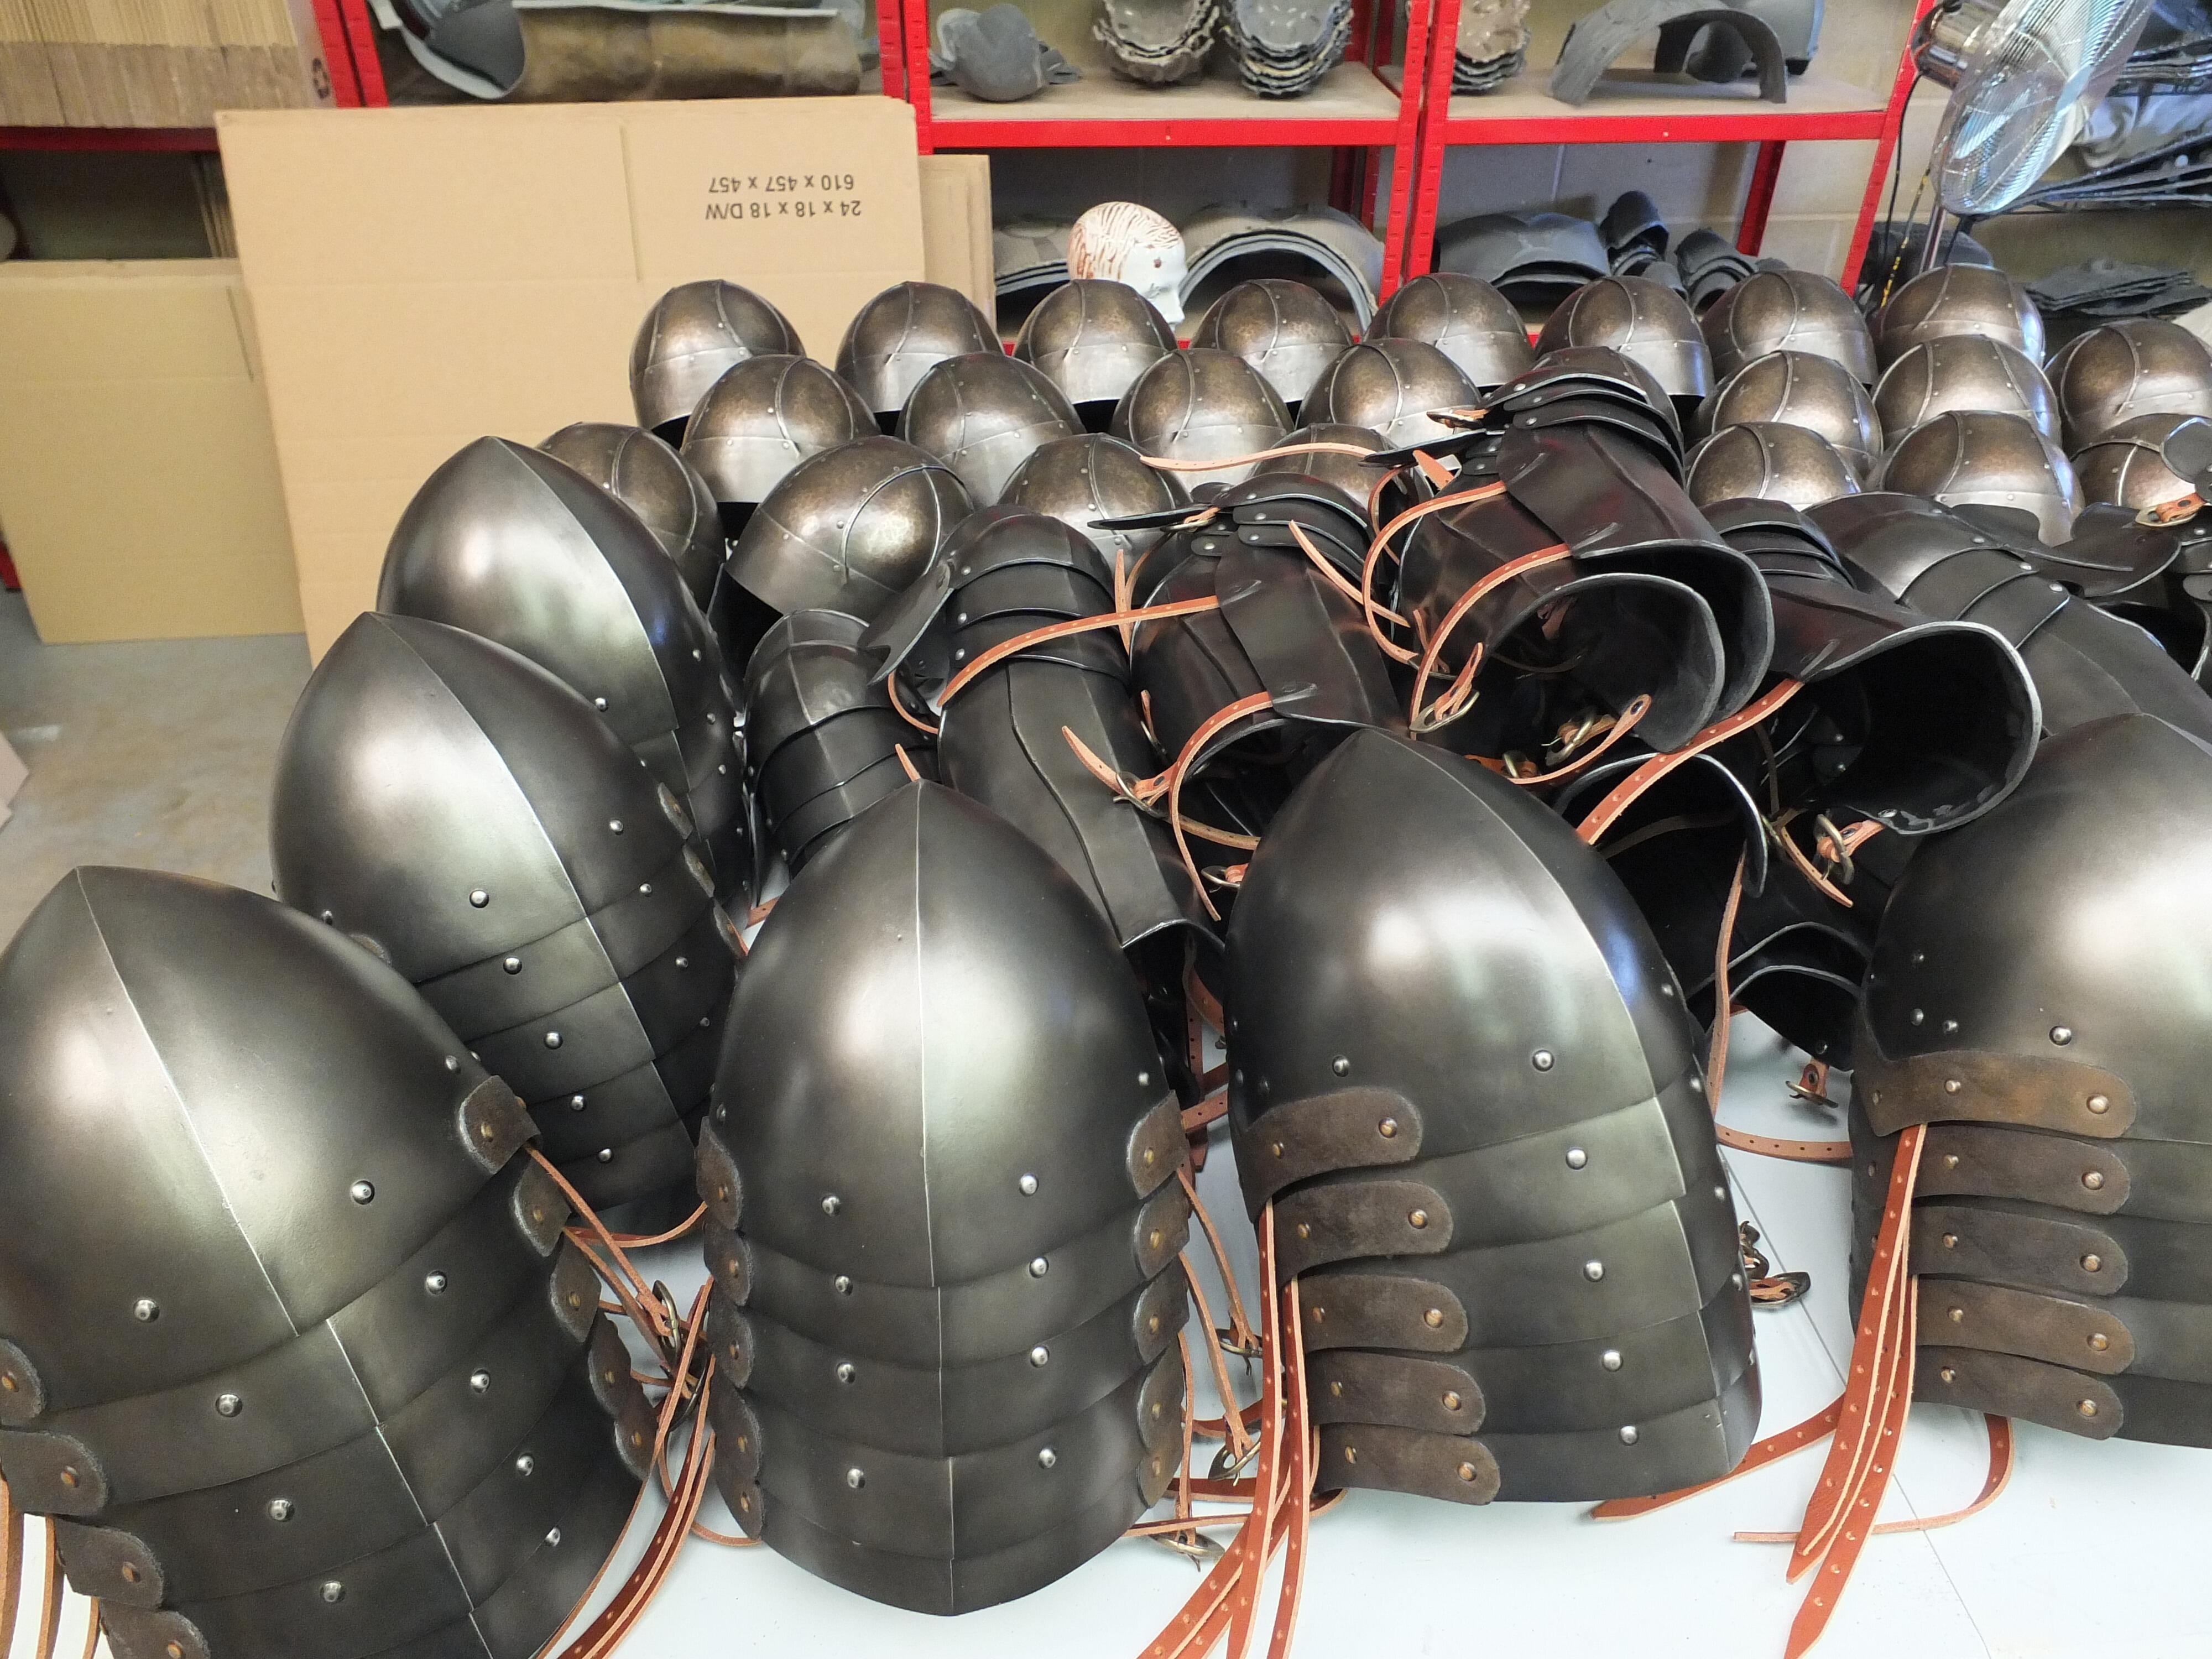 Helmets and Greaves for TV show.